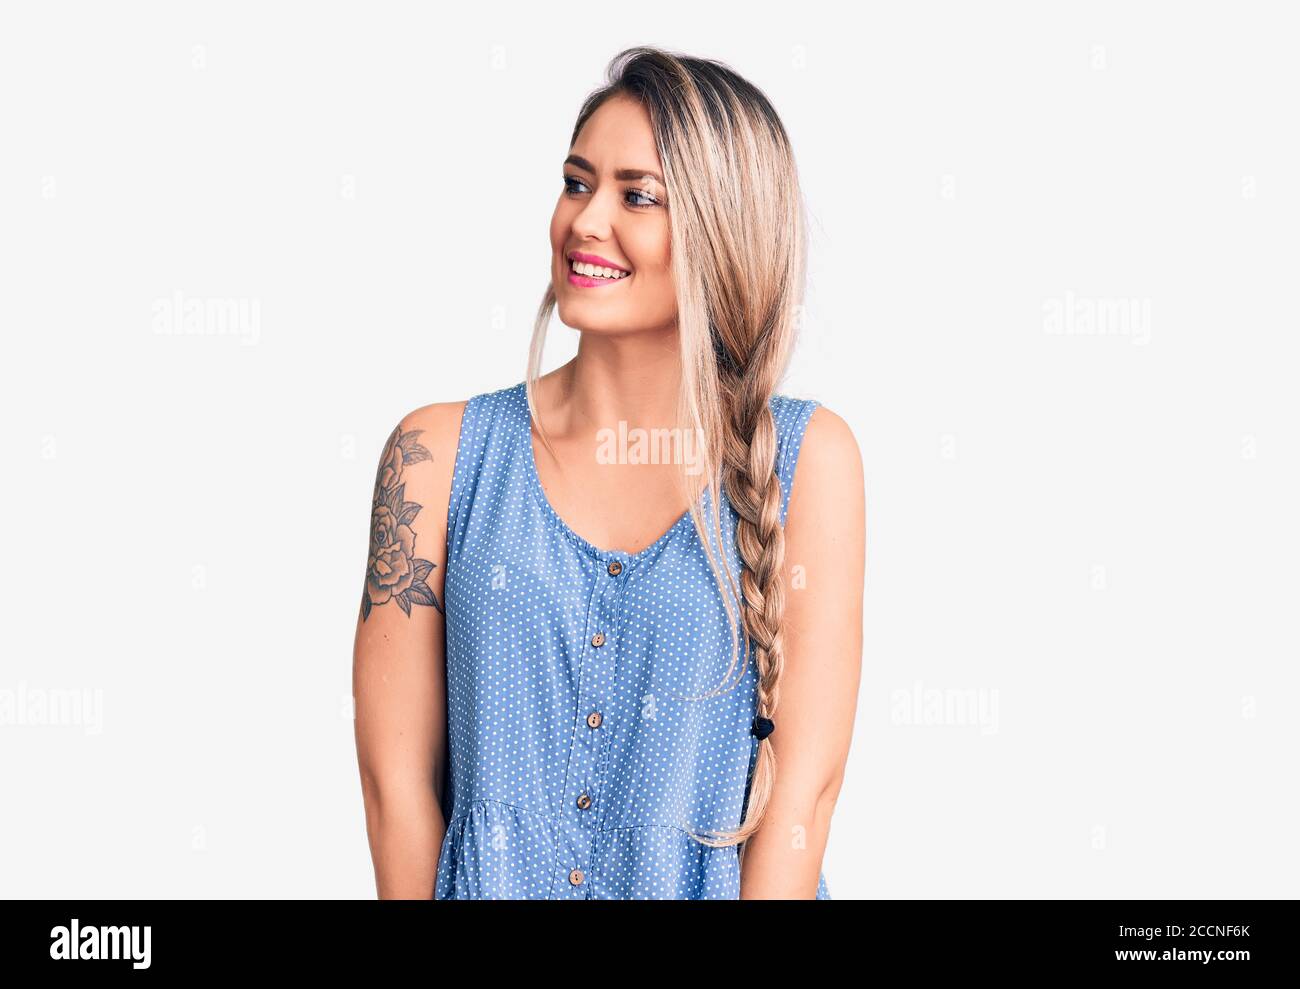 https://c8.alamy.com/comp/2CCNF6K/young-beautiful-blonde-woman-wearing-casual-sleeveless-t-shirt-looking-away-to-side-with-smile-on-face-natural-expression-laughing-confident-2CCNF6K.jpg